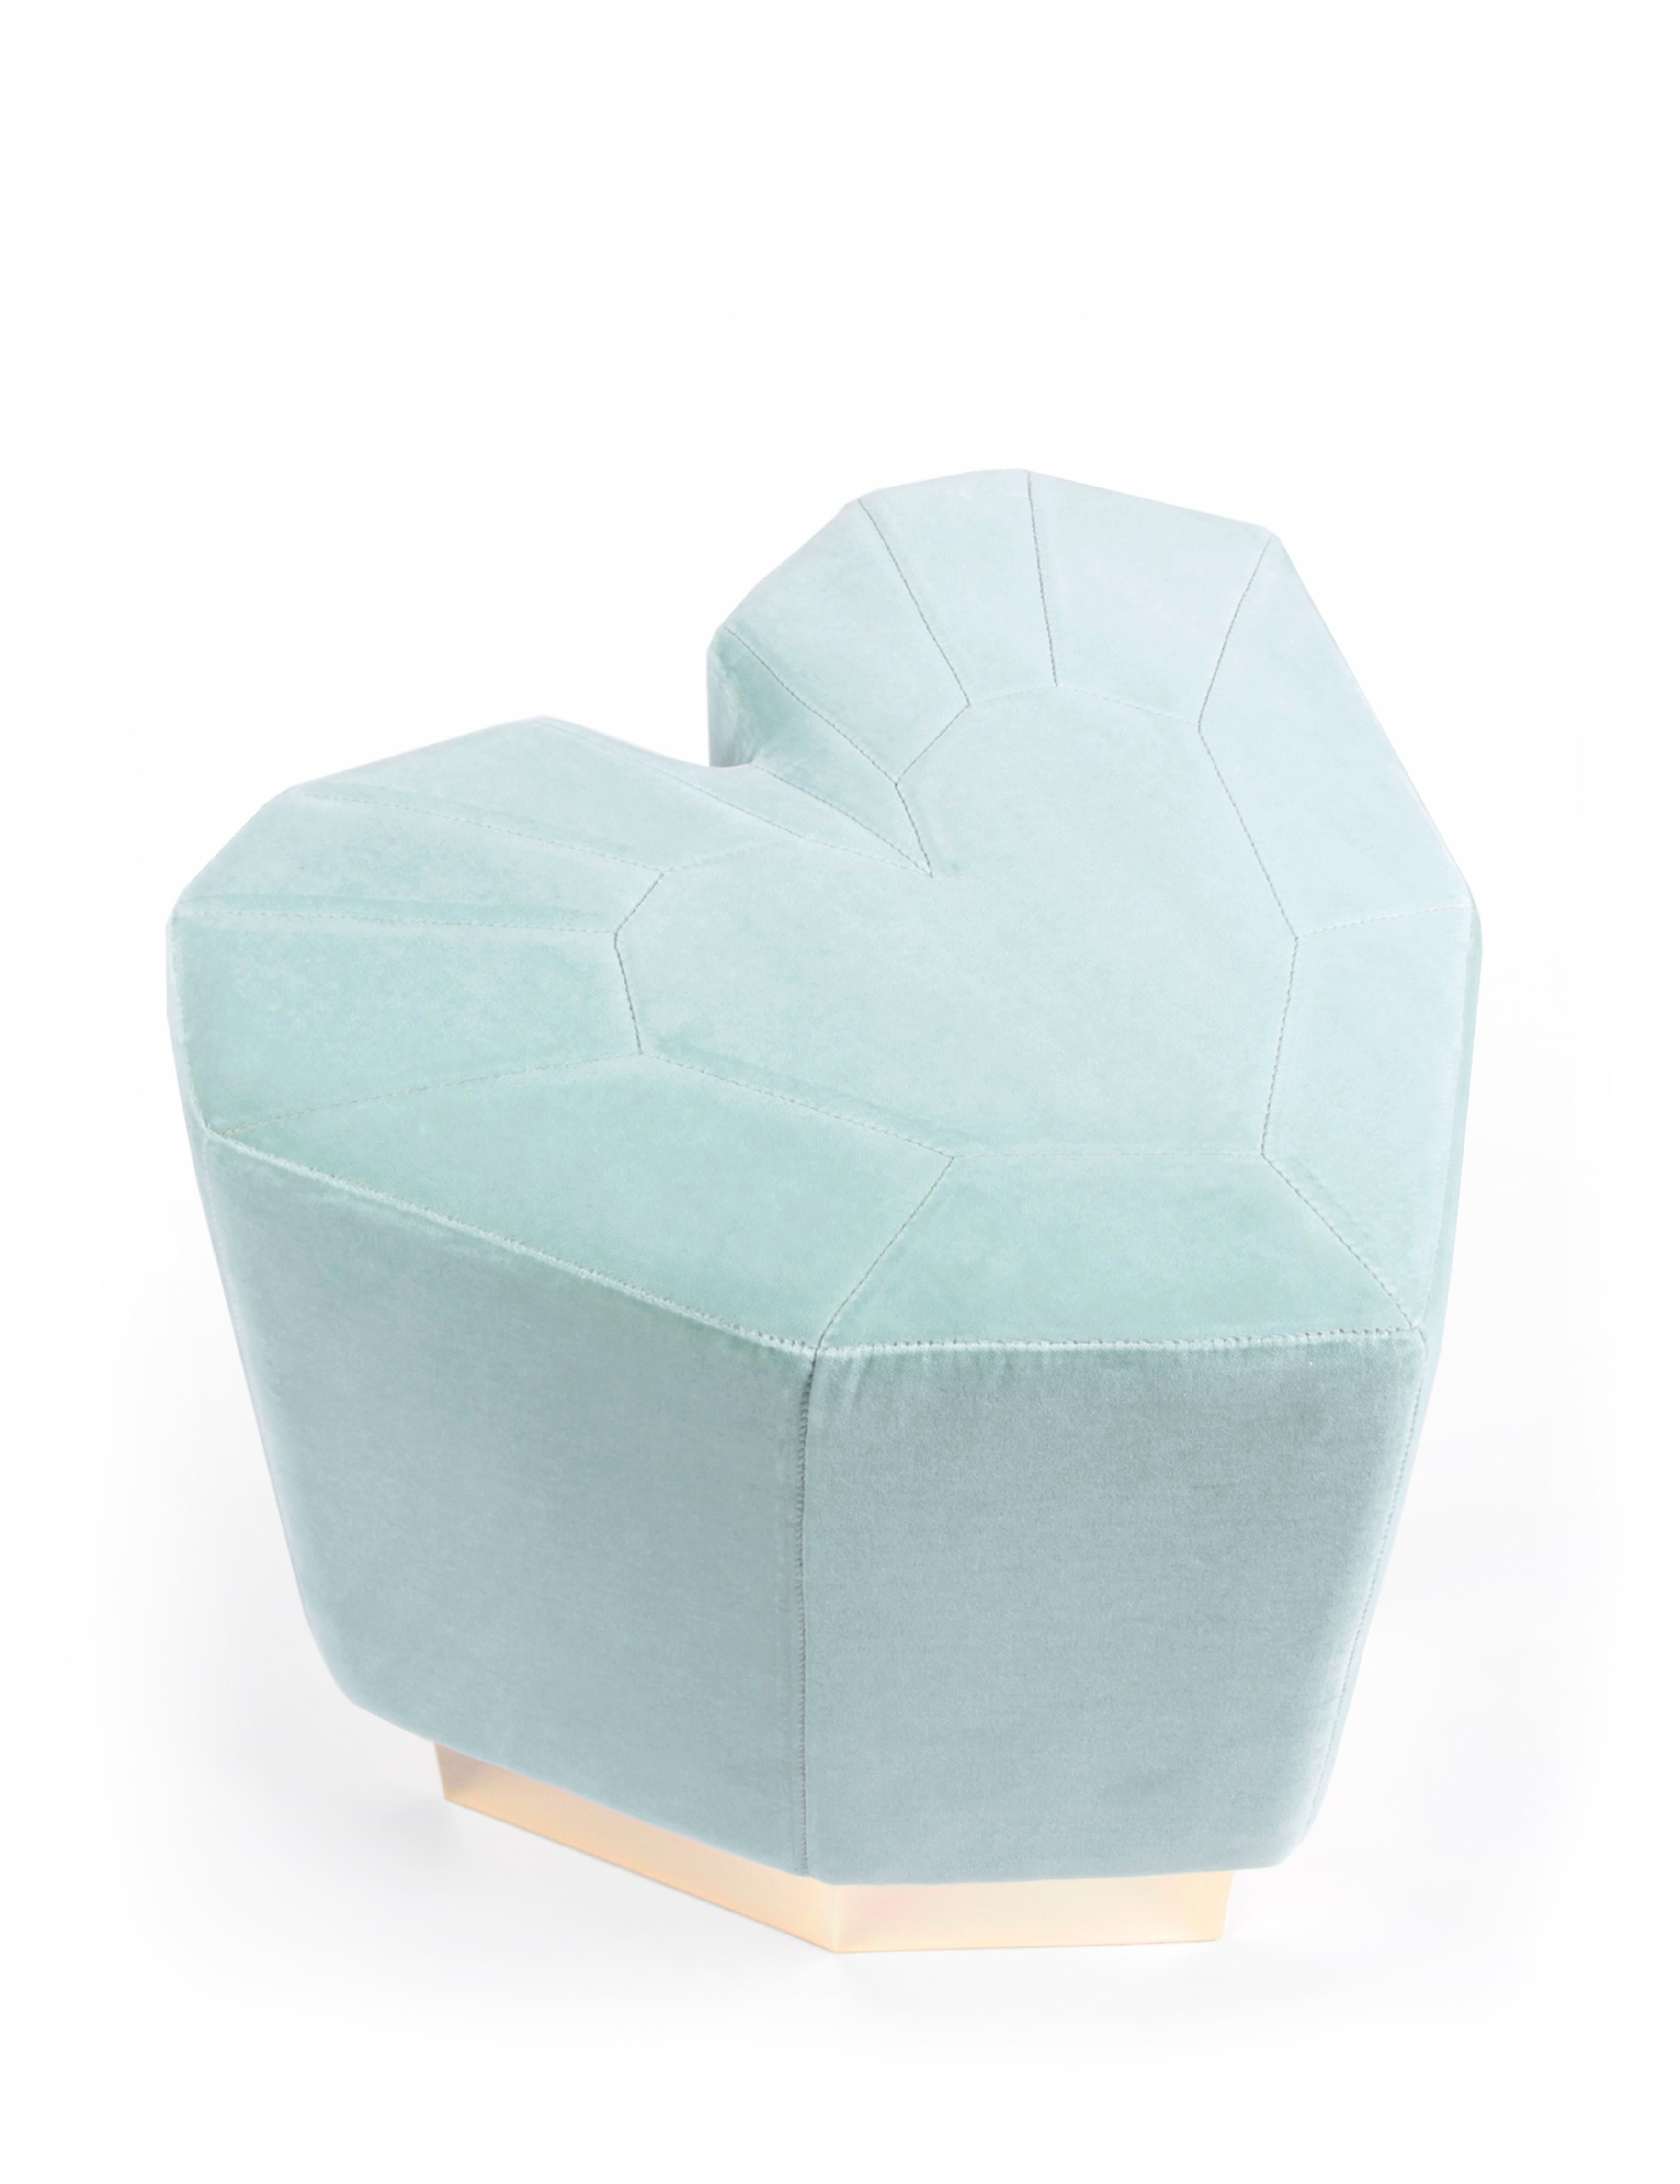 Contemporary Mint Green Queen Heart Stool by Royal Stranger